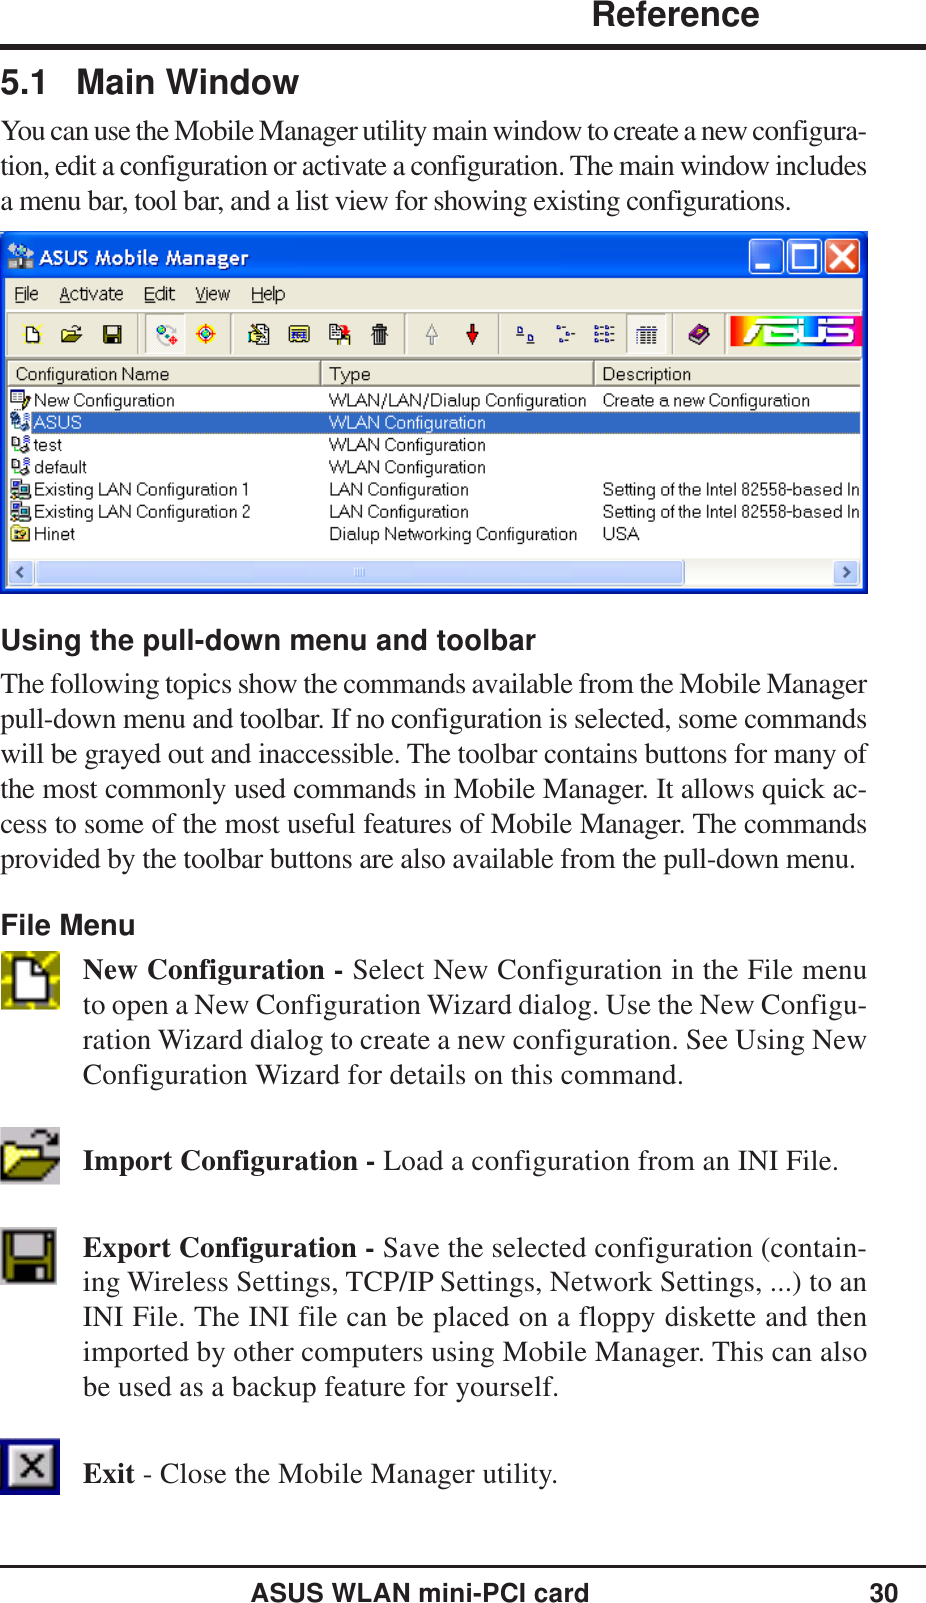 ASUS WLAN mini-PCI card 30             ReferenceChapter 35.1 Main WindowYou can use the Mobile Manager utility main window to create a new configura-tion, edit a configuration or activate a configuration. The main window includesa menu bar, tool bar, and a list view for showing existing configurations.Using the pull-down menu and toolbarThe following topics show the commands available from the Mobile Managerpull-down menu and toolbar. If no configuration is selected, some commandswill be grayed out and inaccessible. The toolbar contains buttons for many ofthe most commonly used commands in Mobile Manager. It allows quick ac-cess to some of the most useful features of Mobile Manager. The commandsprovided by the toolbar buttons are also available from the pull-down menu.File MenuNew Configuration - Select New Configuration in the File menuto open a New Configuration Wizard dialog. Use the New Configu-ration Wizard dialog to create a new configuration. See Using NewConfiguration Wizard for details on this command.Import Configuration - Load a configuration from an INI File.Export Configuration - Save the selected configuration (contain-ing Wireless Settings, TCP/IP Settings, Network Settings, ...) to anINI File. The INI file can be placed on a floppy diskette and thenimported by other computers using Mobile Manager. This can alsobe used as a backup feature for yourself.Exit - Close the Mobile Manager utility.